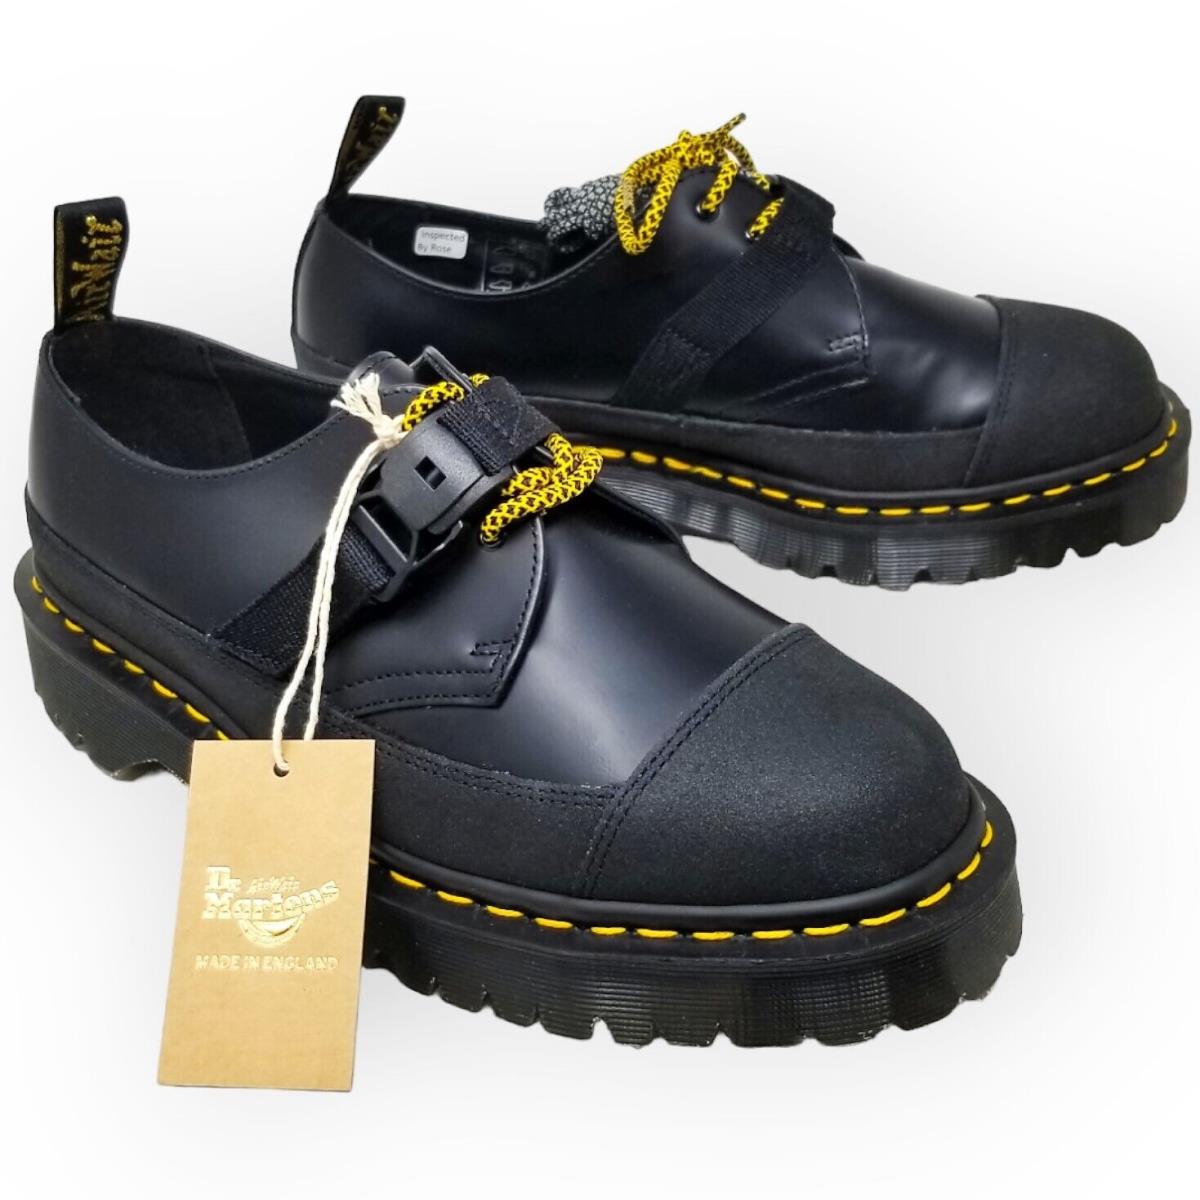 DR Martens - 1461 Made in England Tech Smooth Leather Oxford Shoes